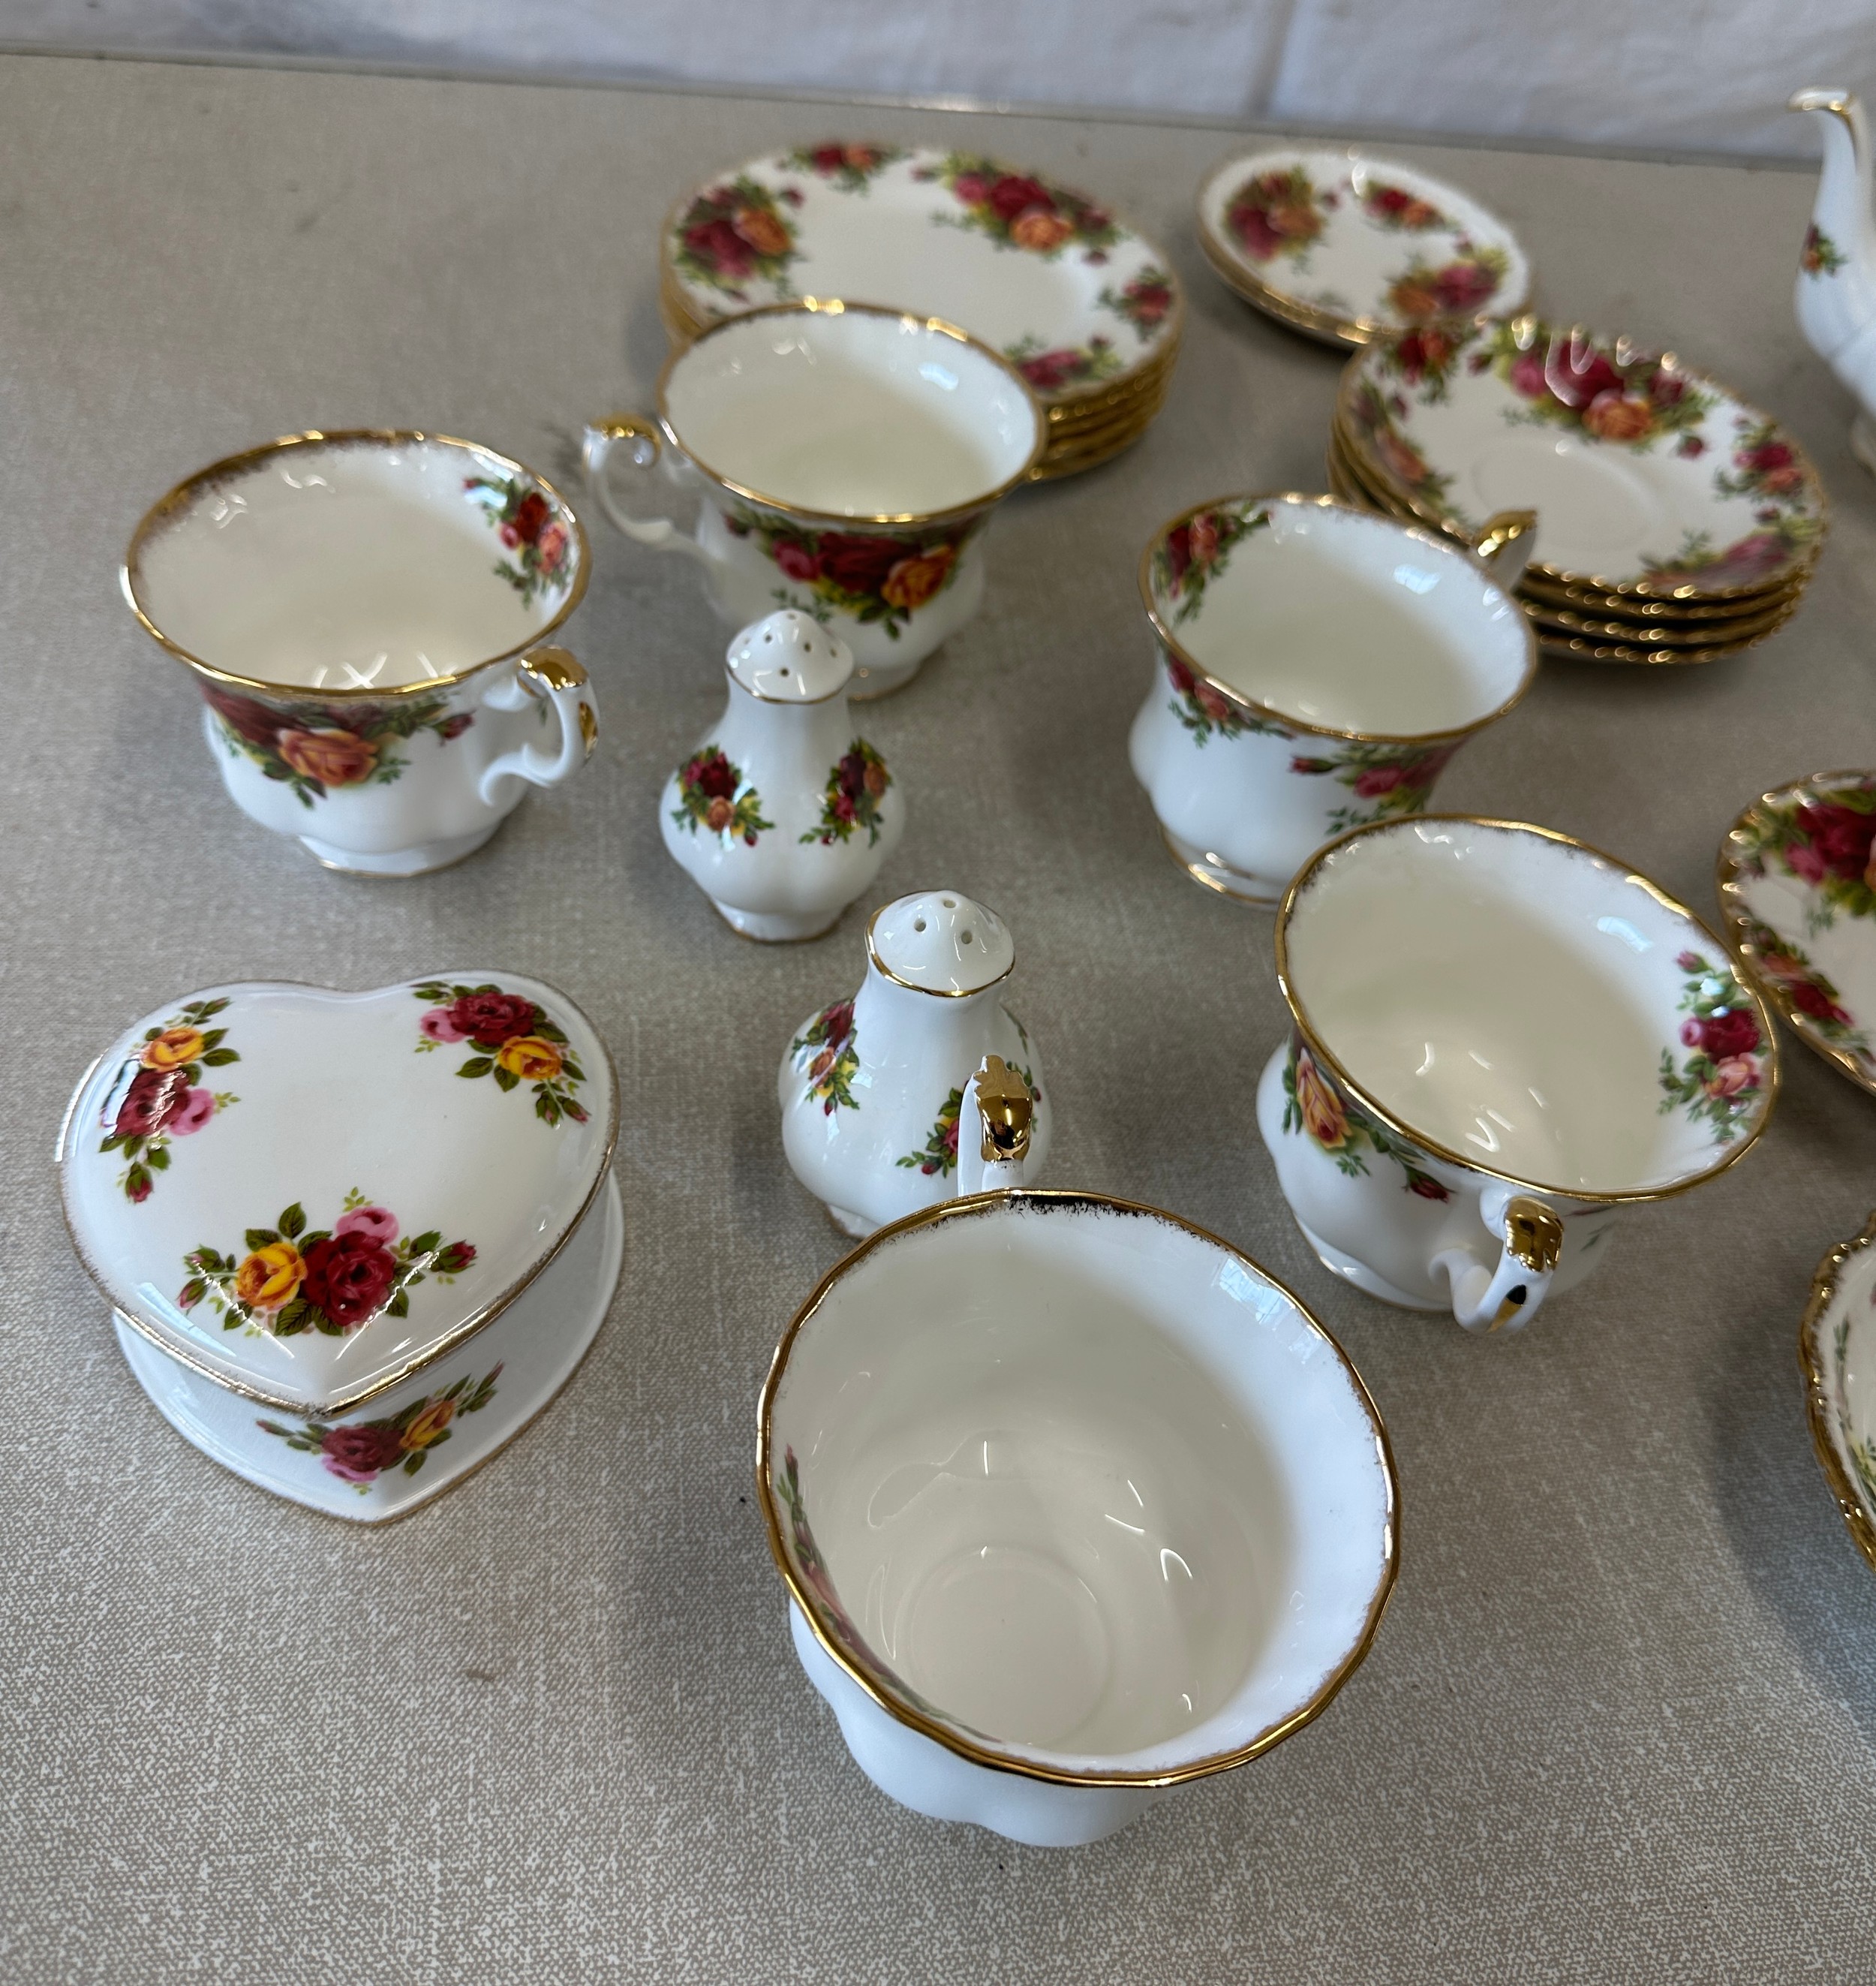 Selection of Royal Albert Old Country Rose part tea service includes tea pot, cups, saucers, salt, - Image 2 of 4